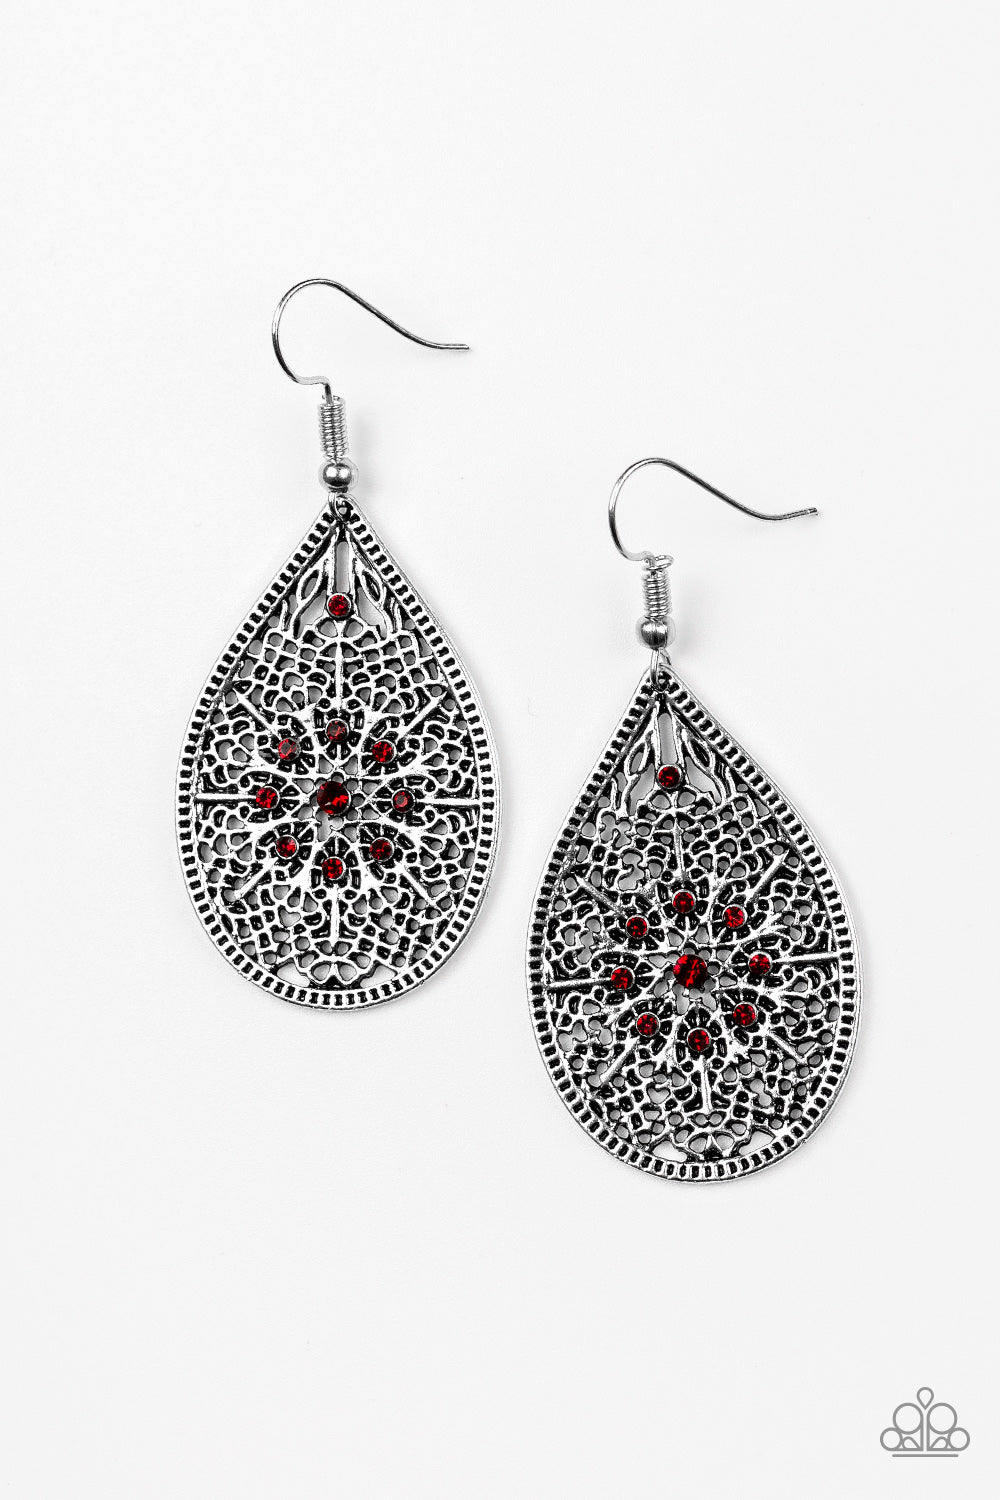 Paparazzi Earrings - Dinner Party Posh - Red